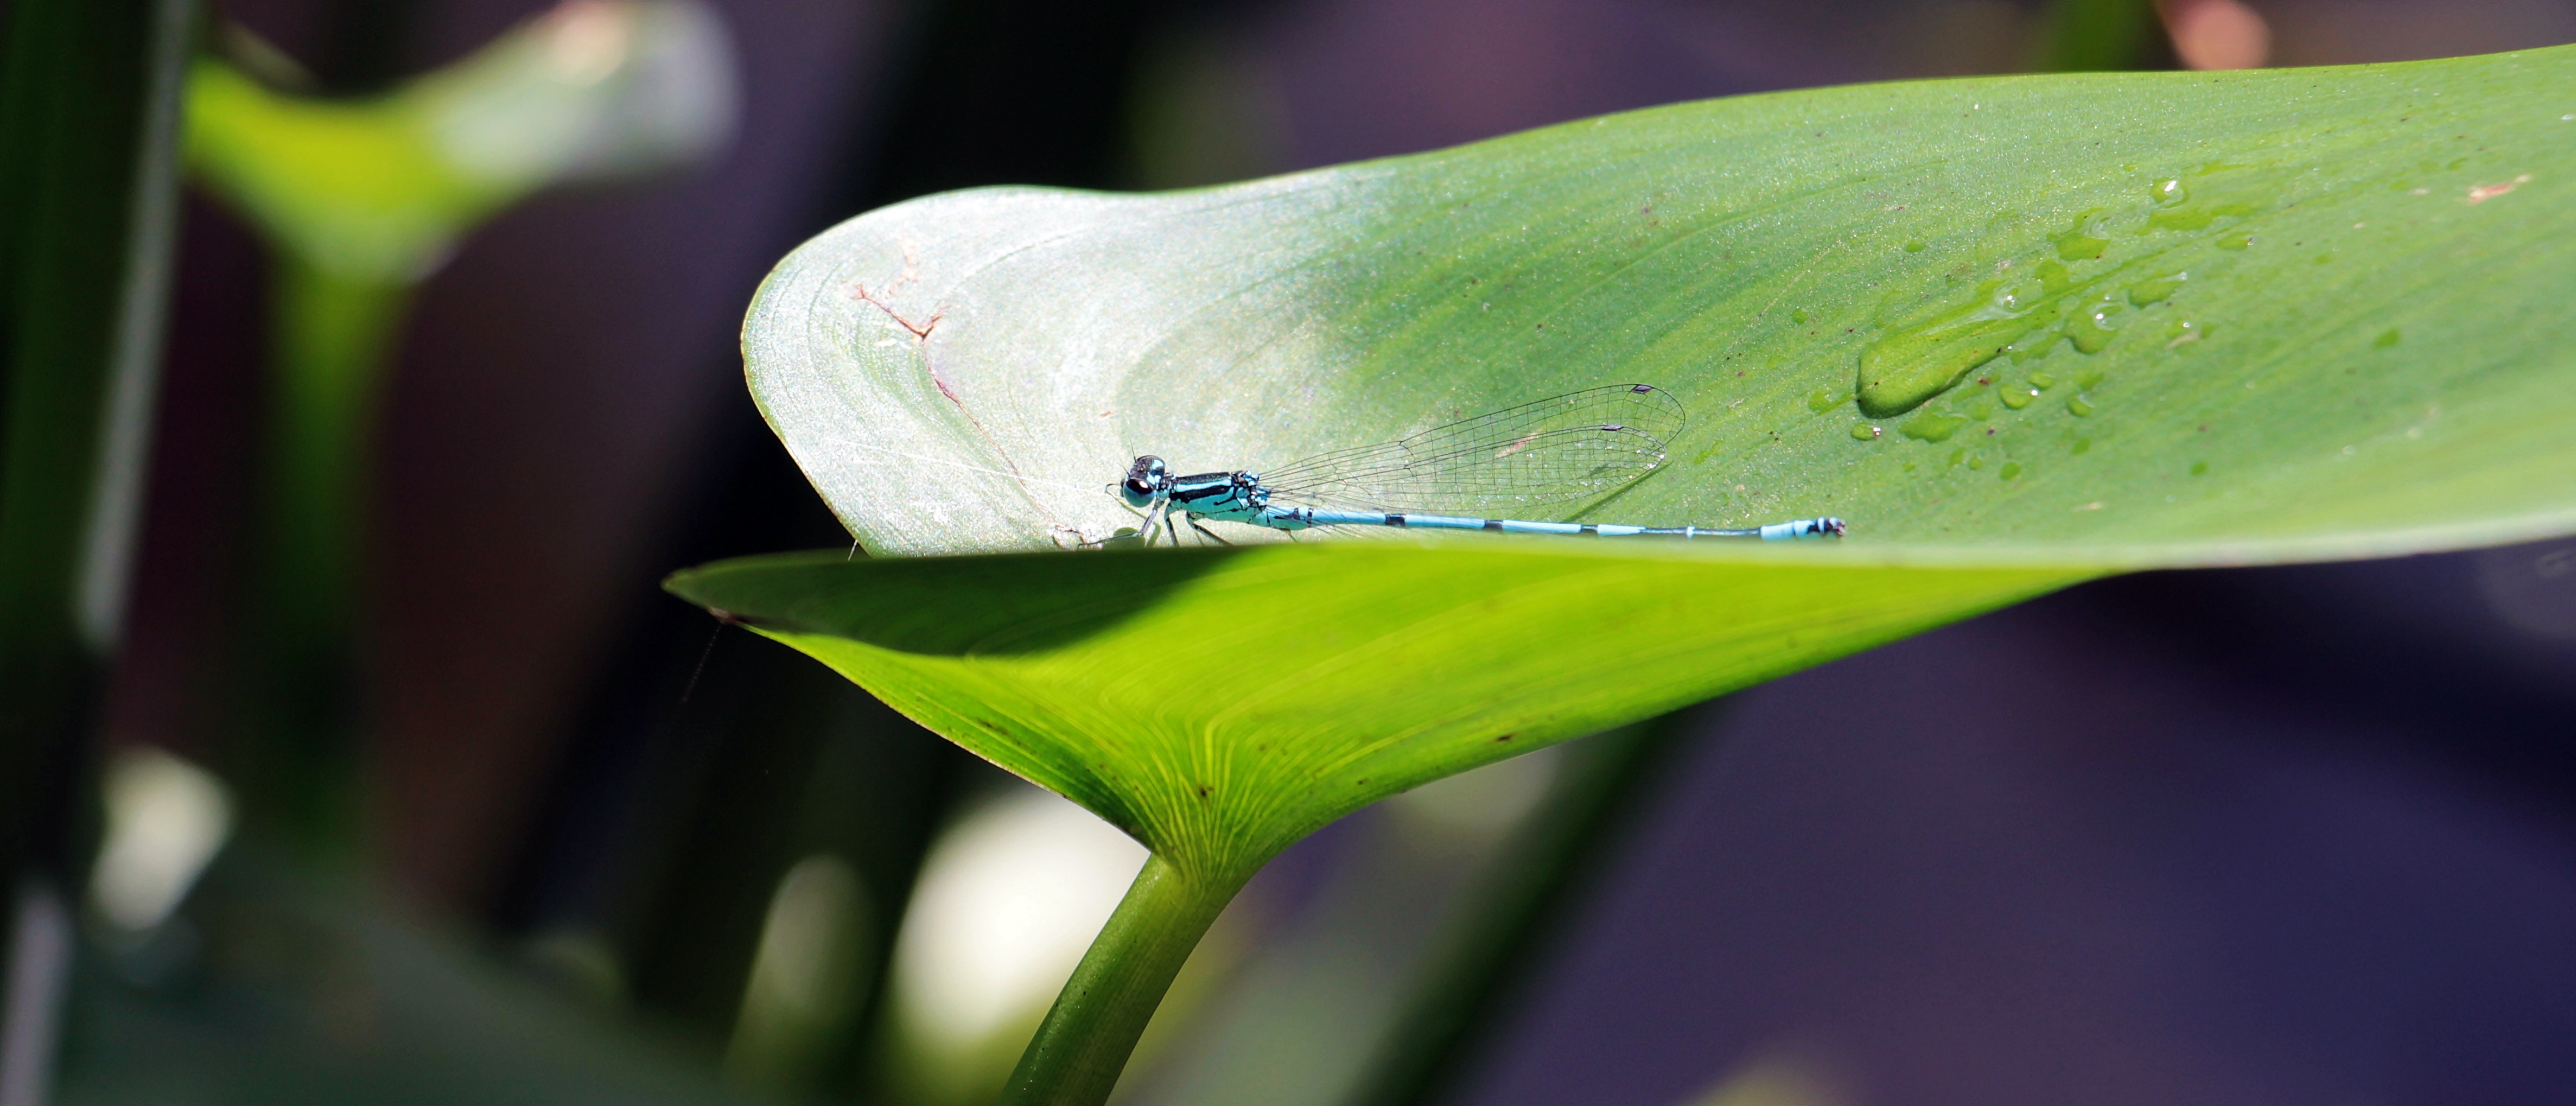 blue dragon fly in green leaf during daytime